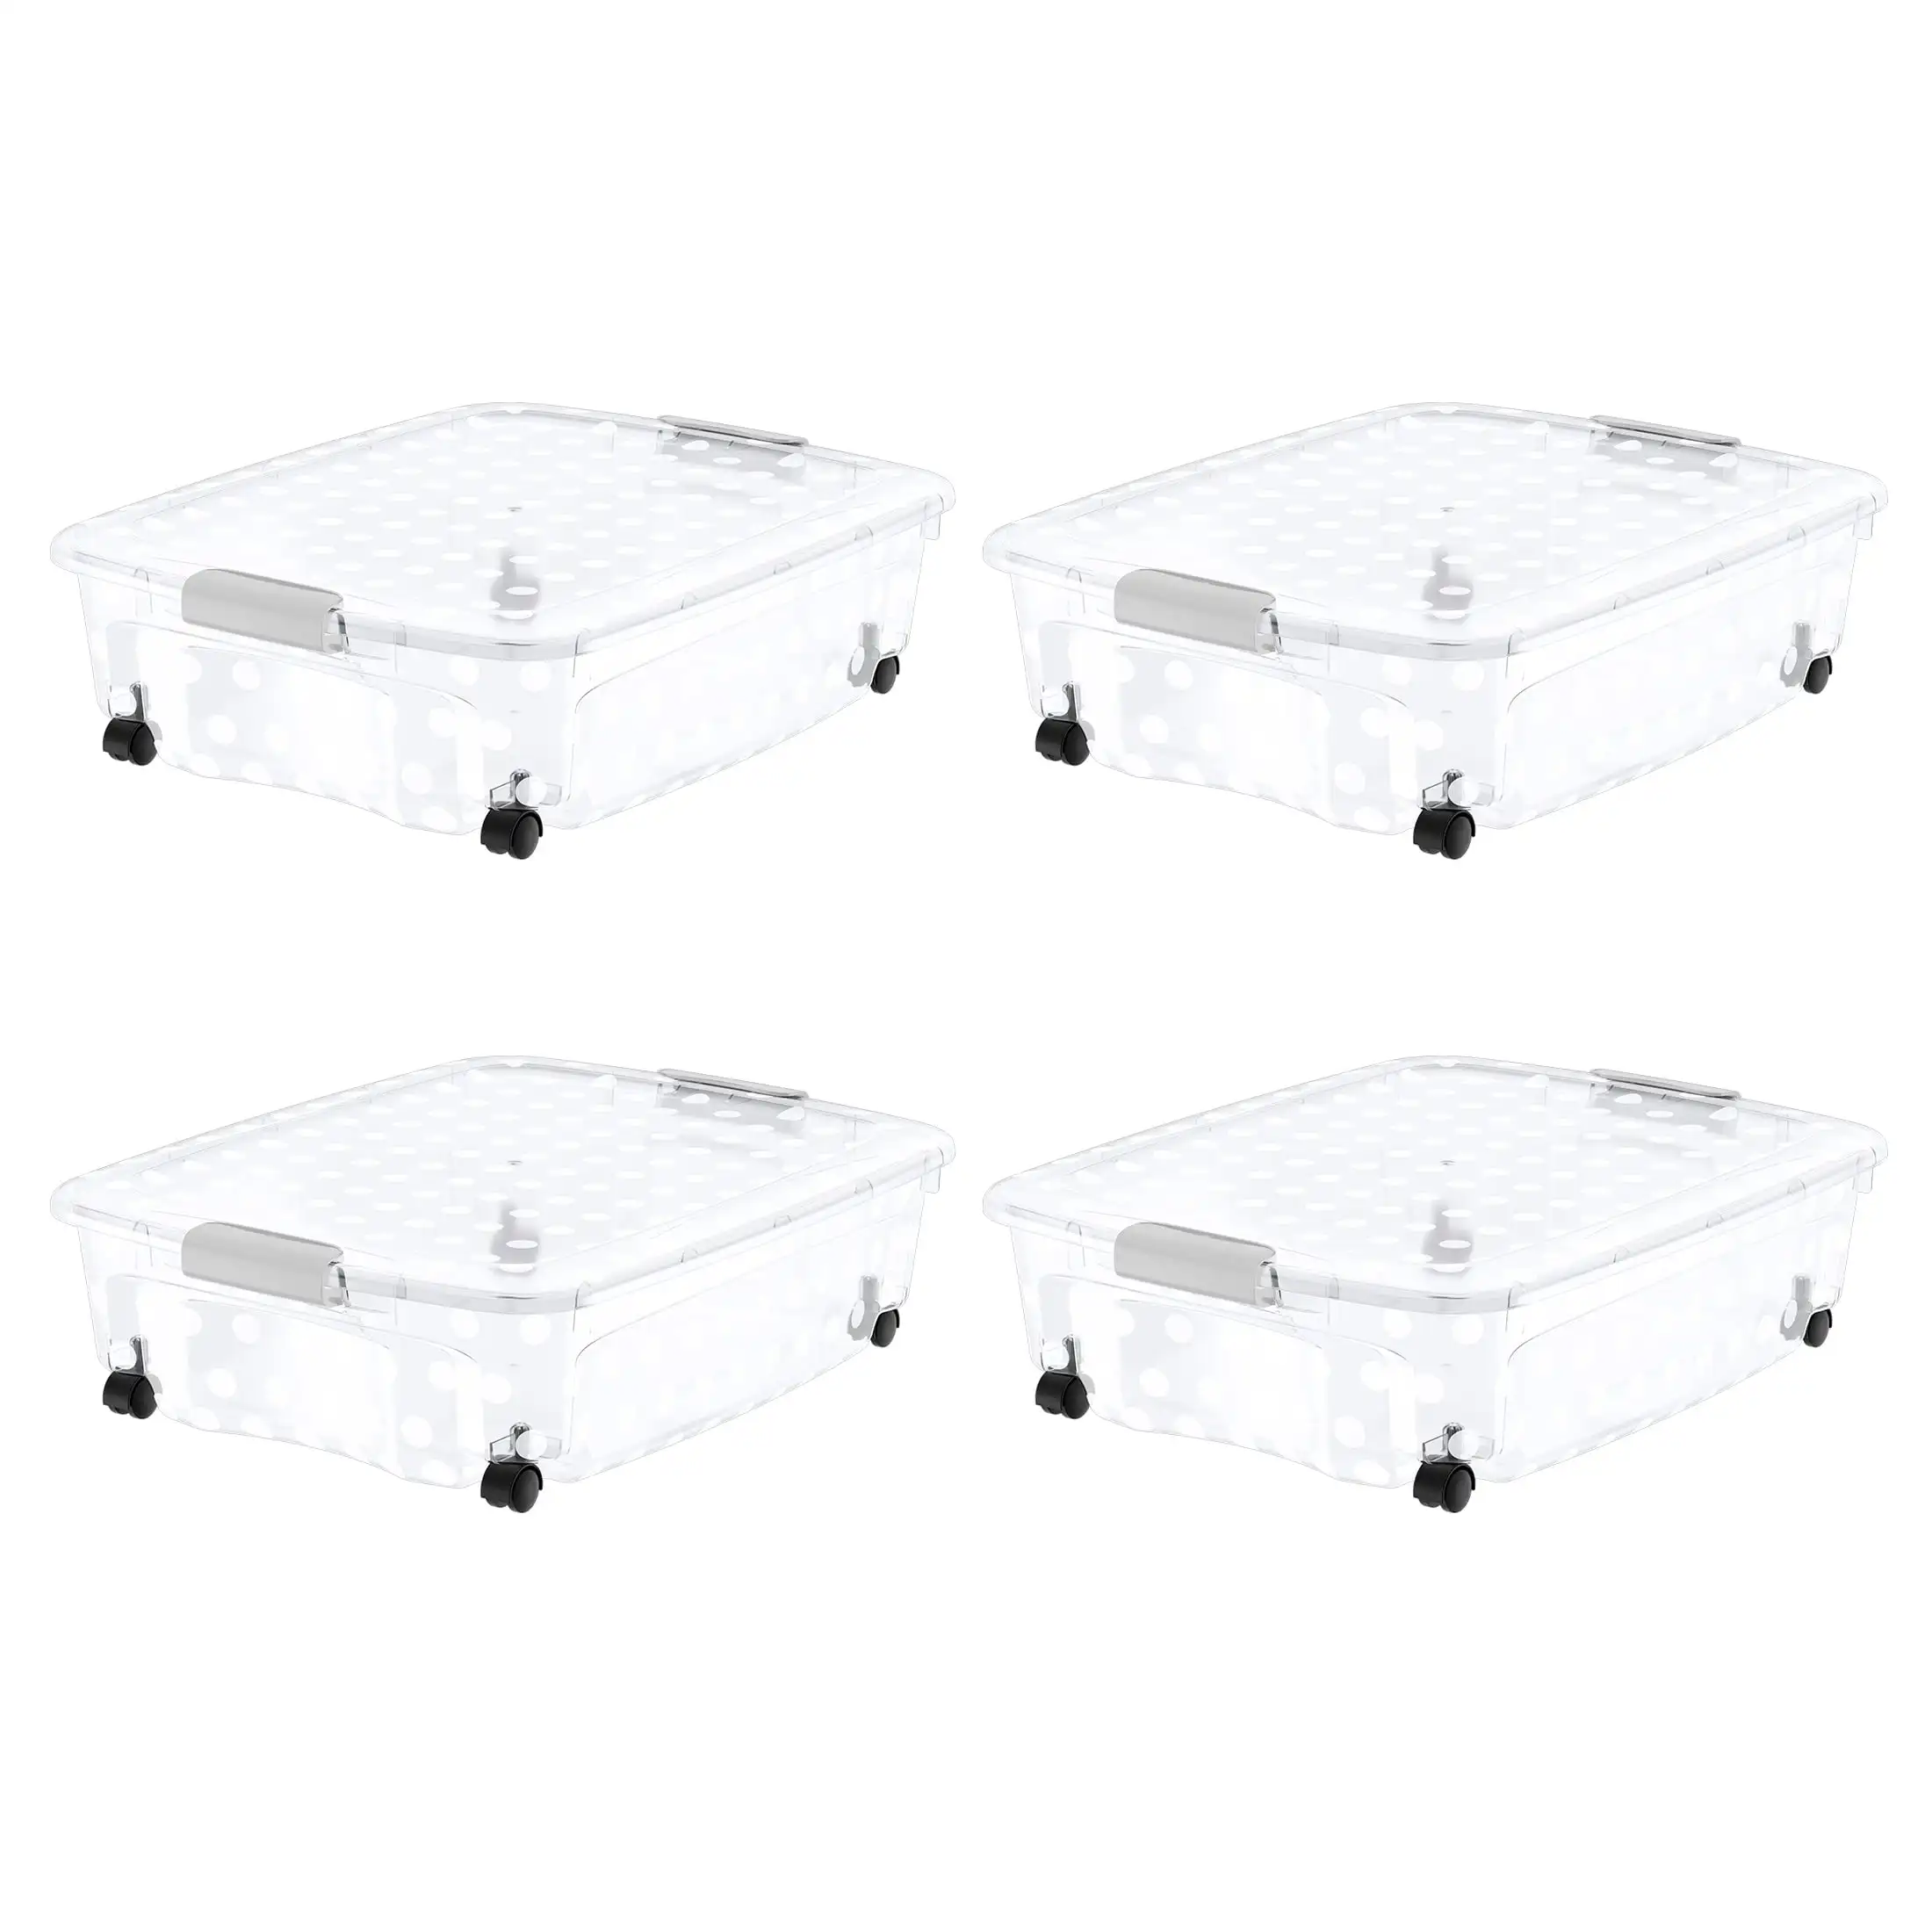 

36.5 Quart Underbed Clear Polka Dot Plastic Latching Lid Tote with 360 Degree Swivel Wheels, Set of 4